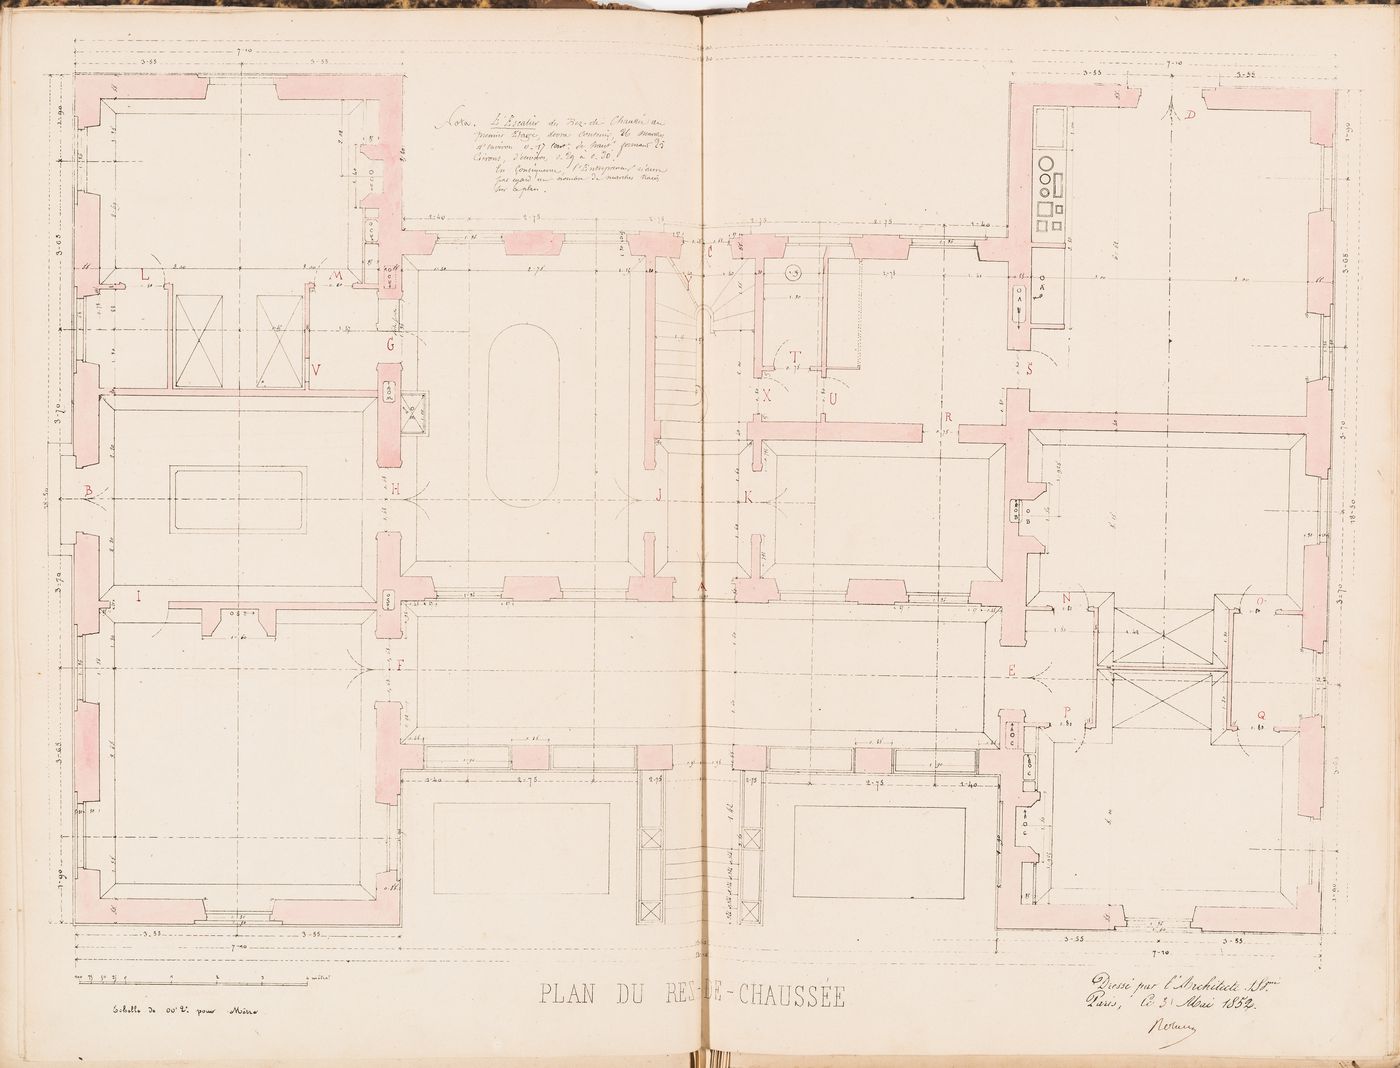 Ground floor plan for a country house for Madame de Lescure, Royan